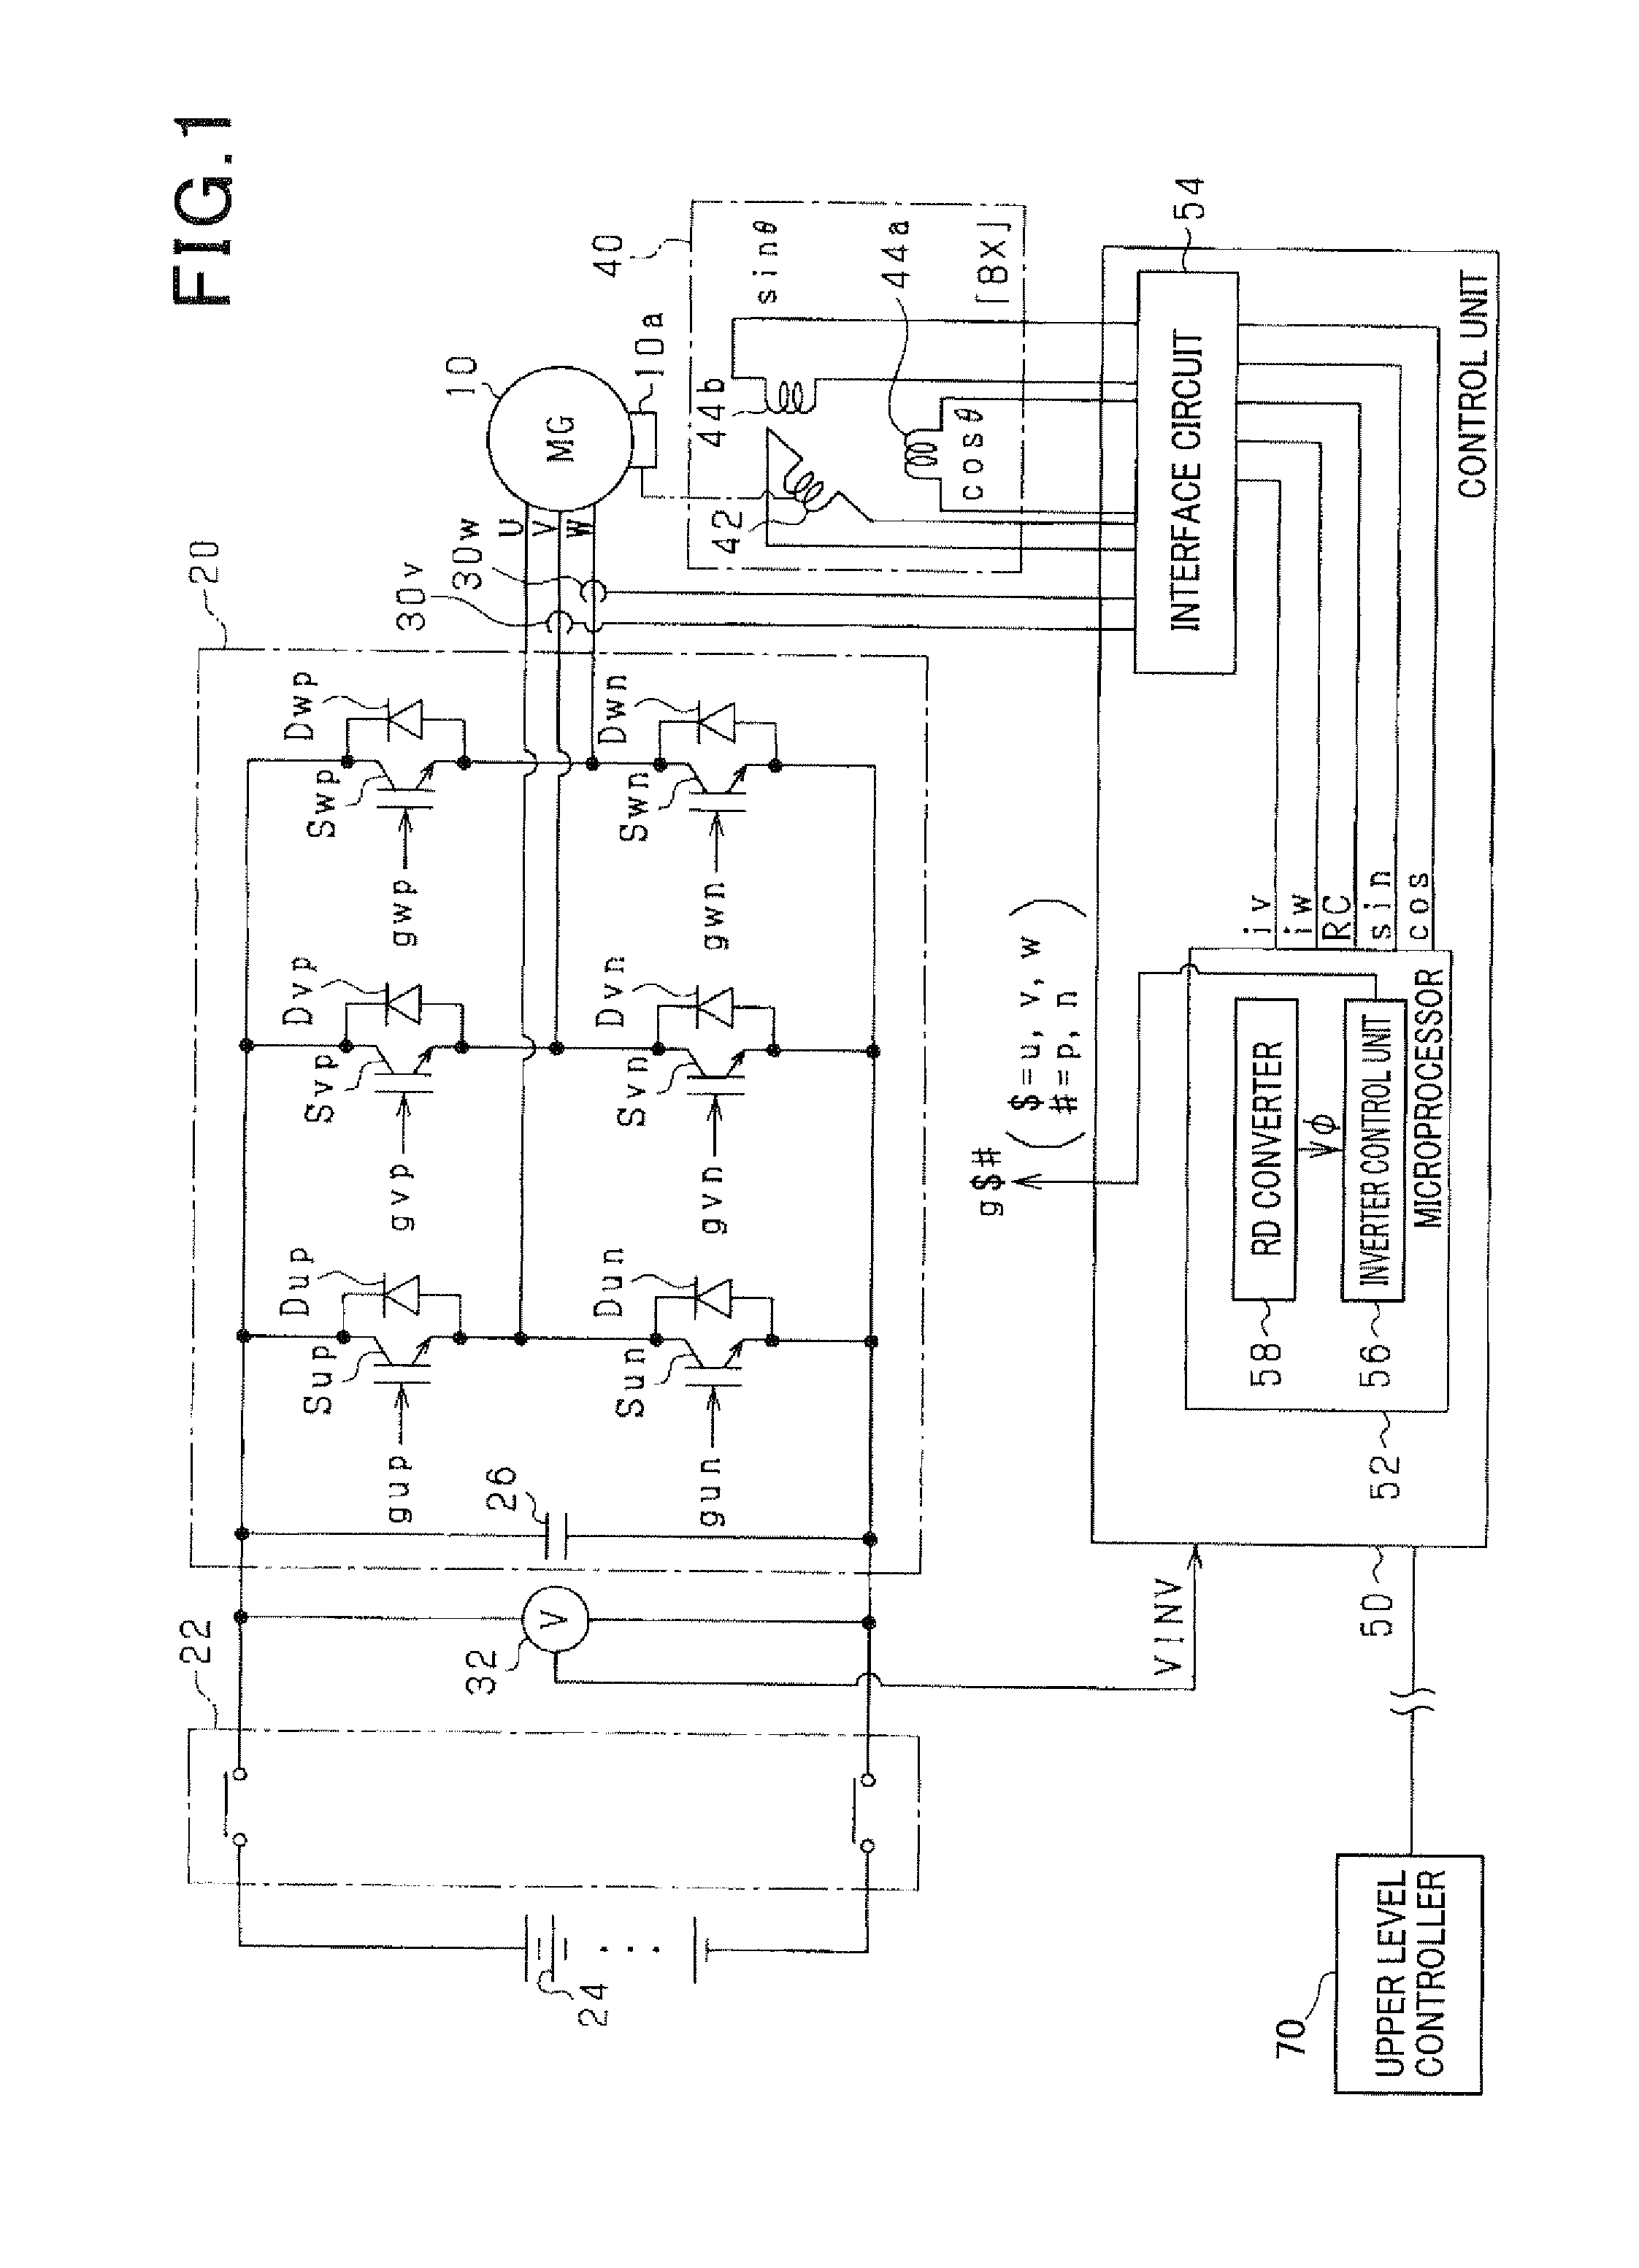 Apparatus for controlling rotating machine based on output signal of resolver